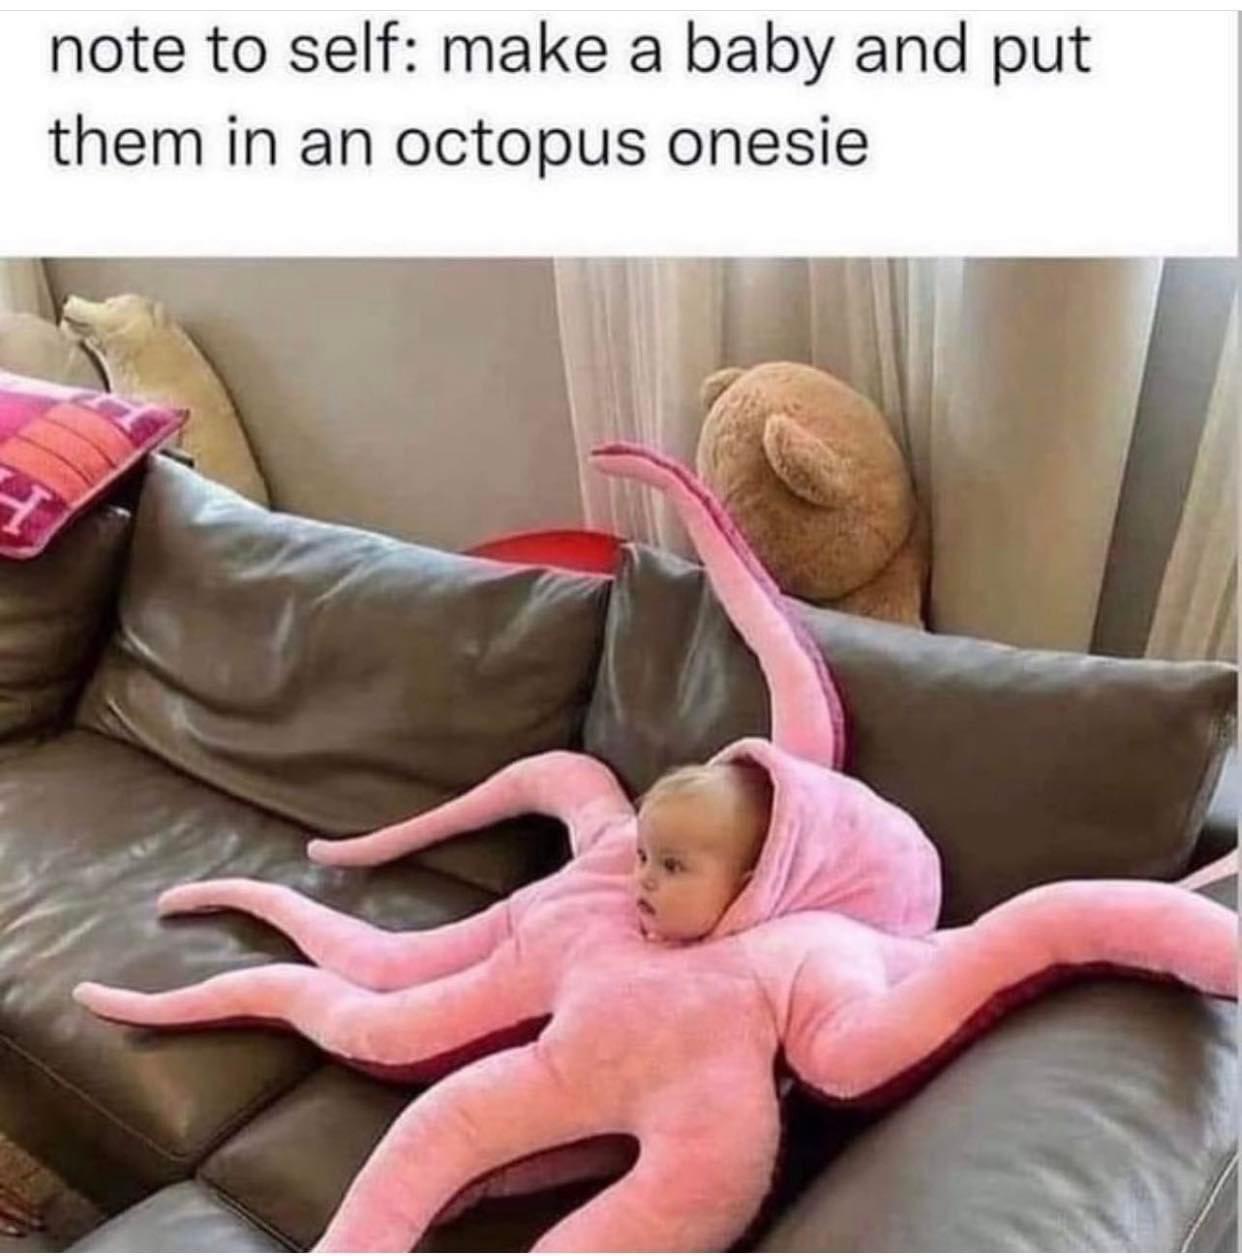 fun randoms - baby octopus costume - note to self make a baby and put them in an octopus onesie